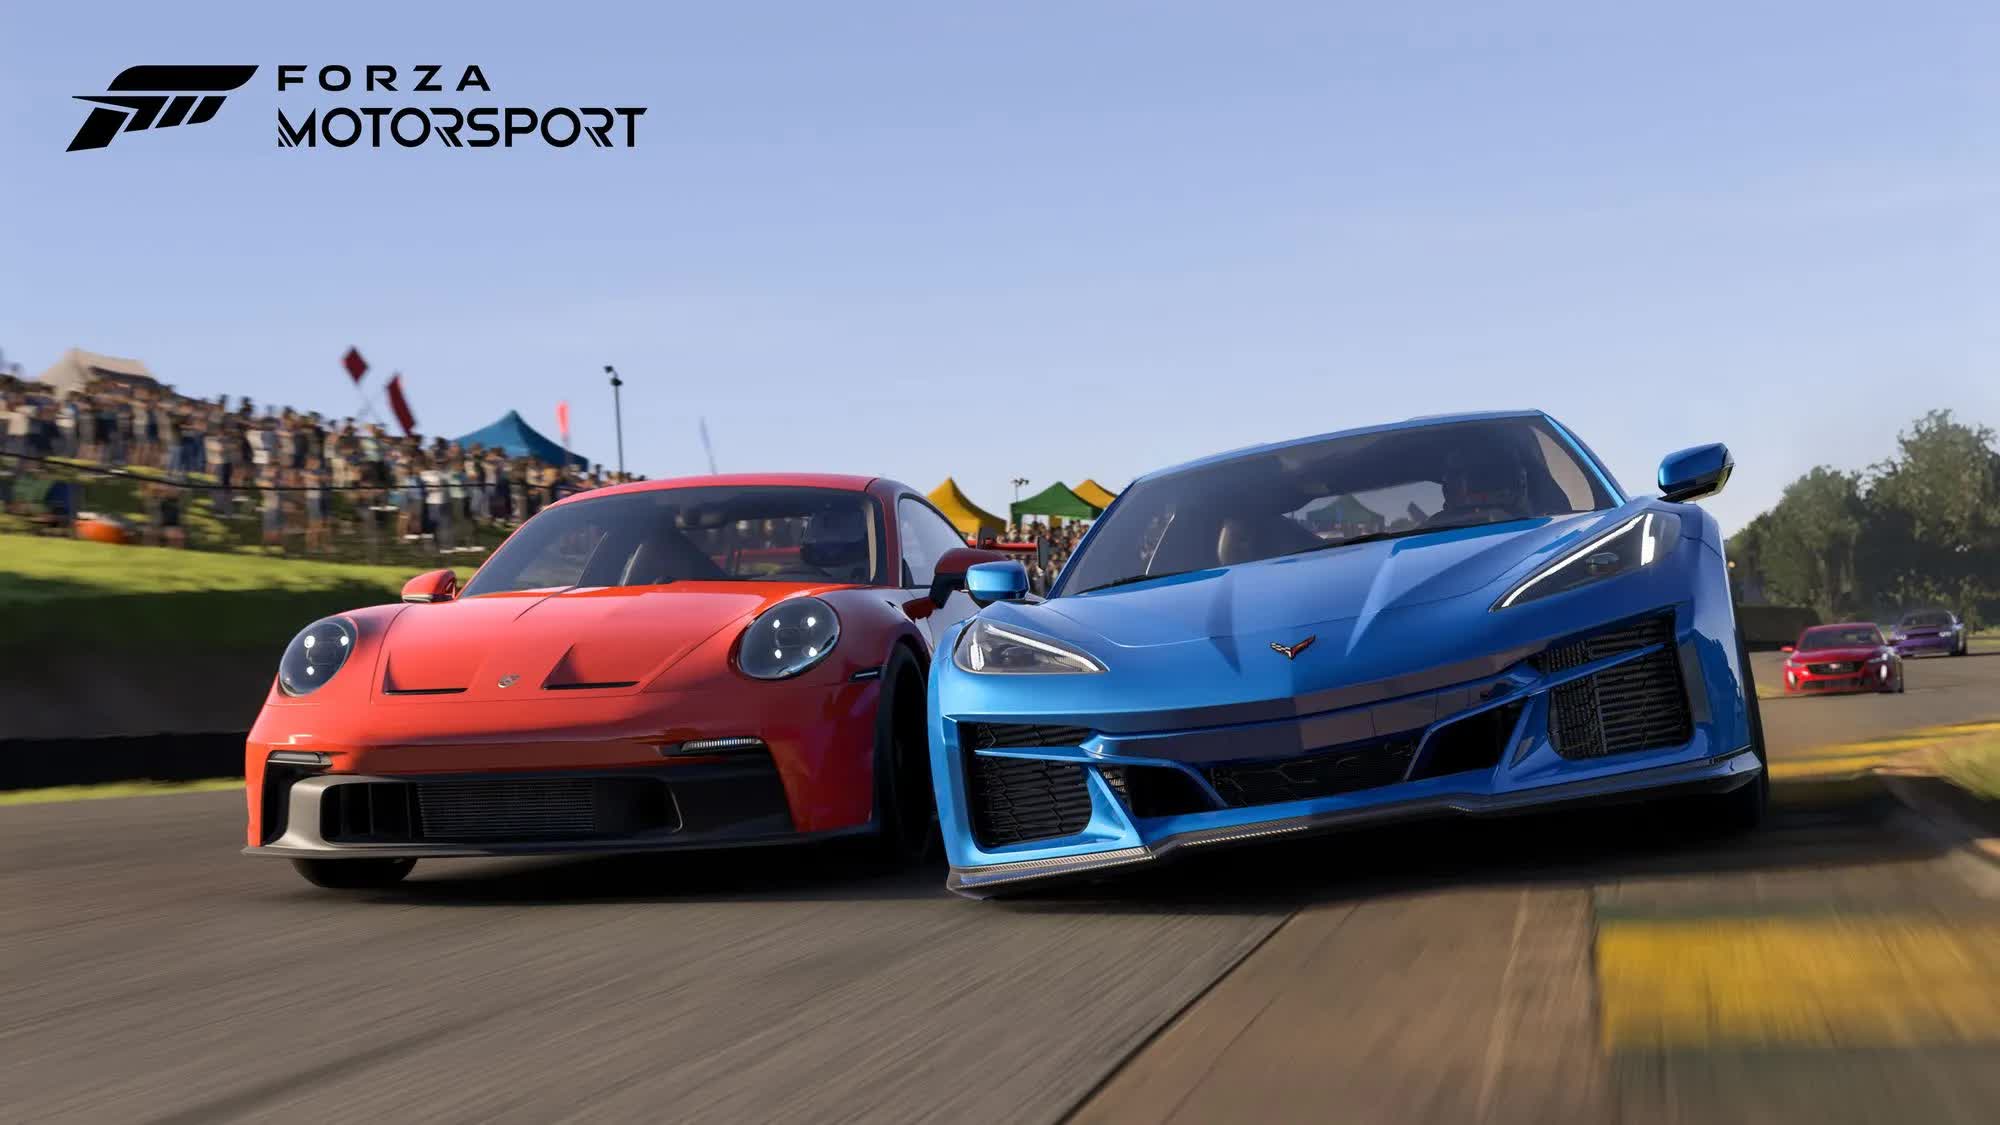 Forza Motorsport's PC requirements revealed: an RTX 4080 (16GB) and NVMe SSD are ideal